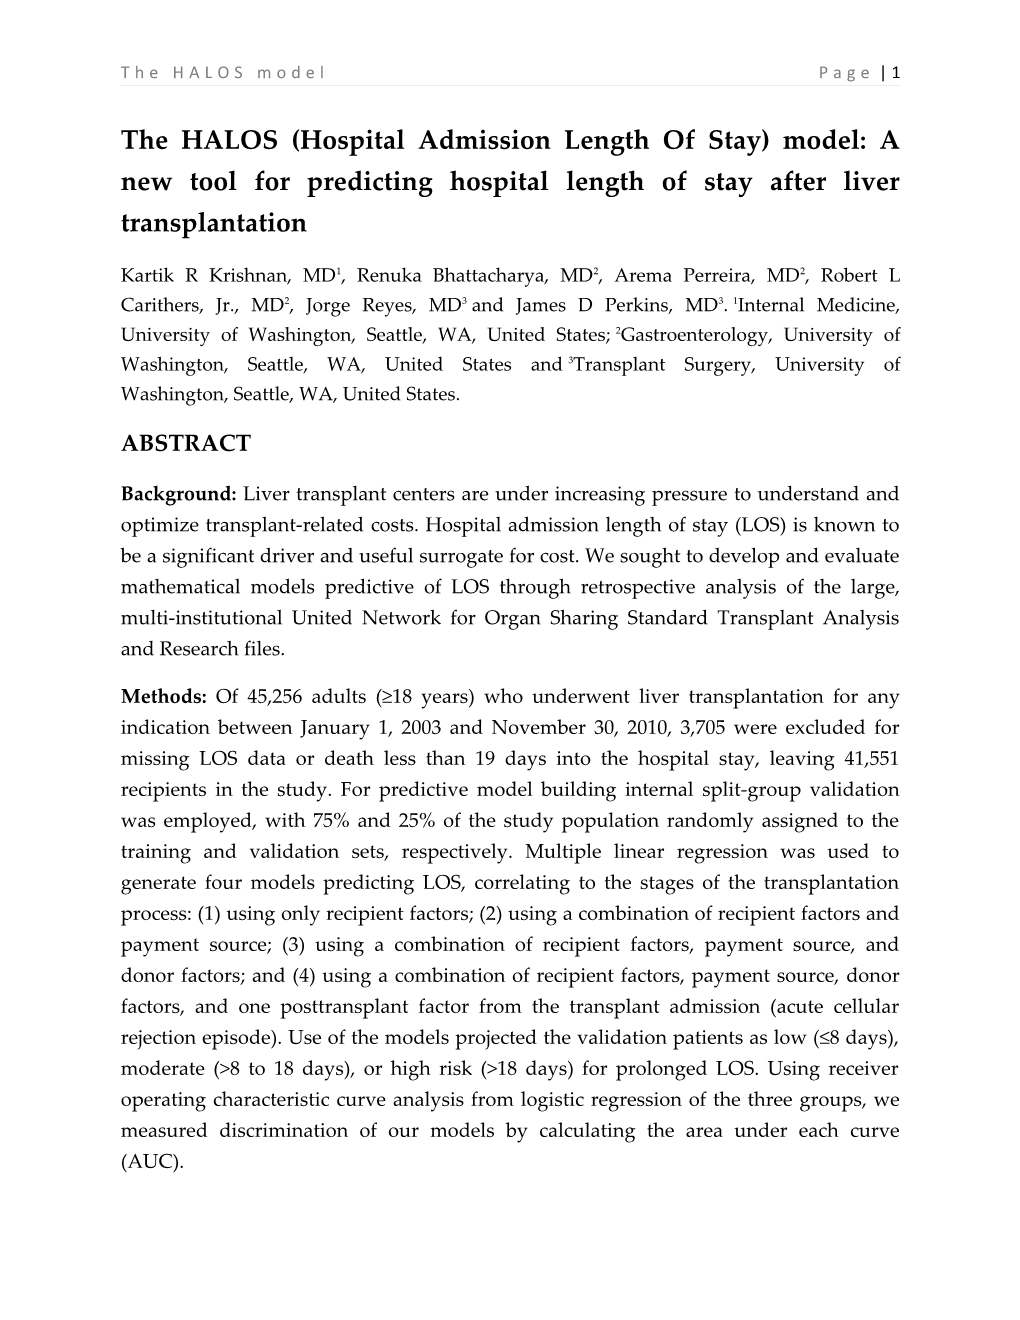 The HALOS (Hospital Admission Length of Stay) Model: a New Tool for Predicting Hospital